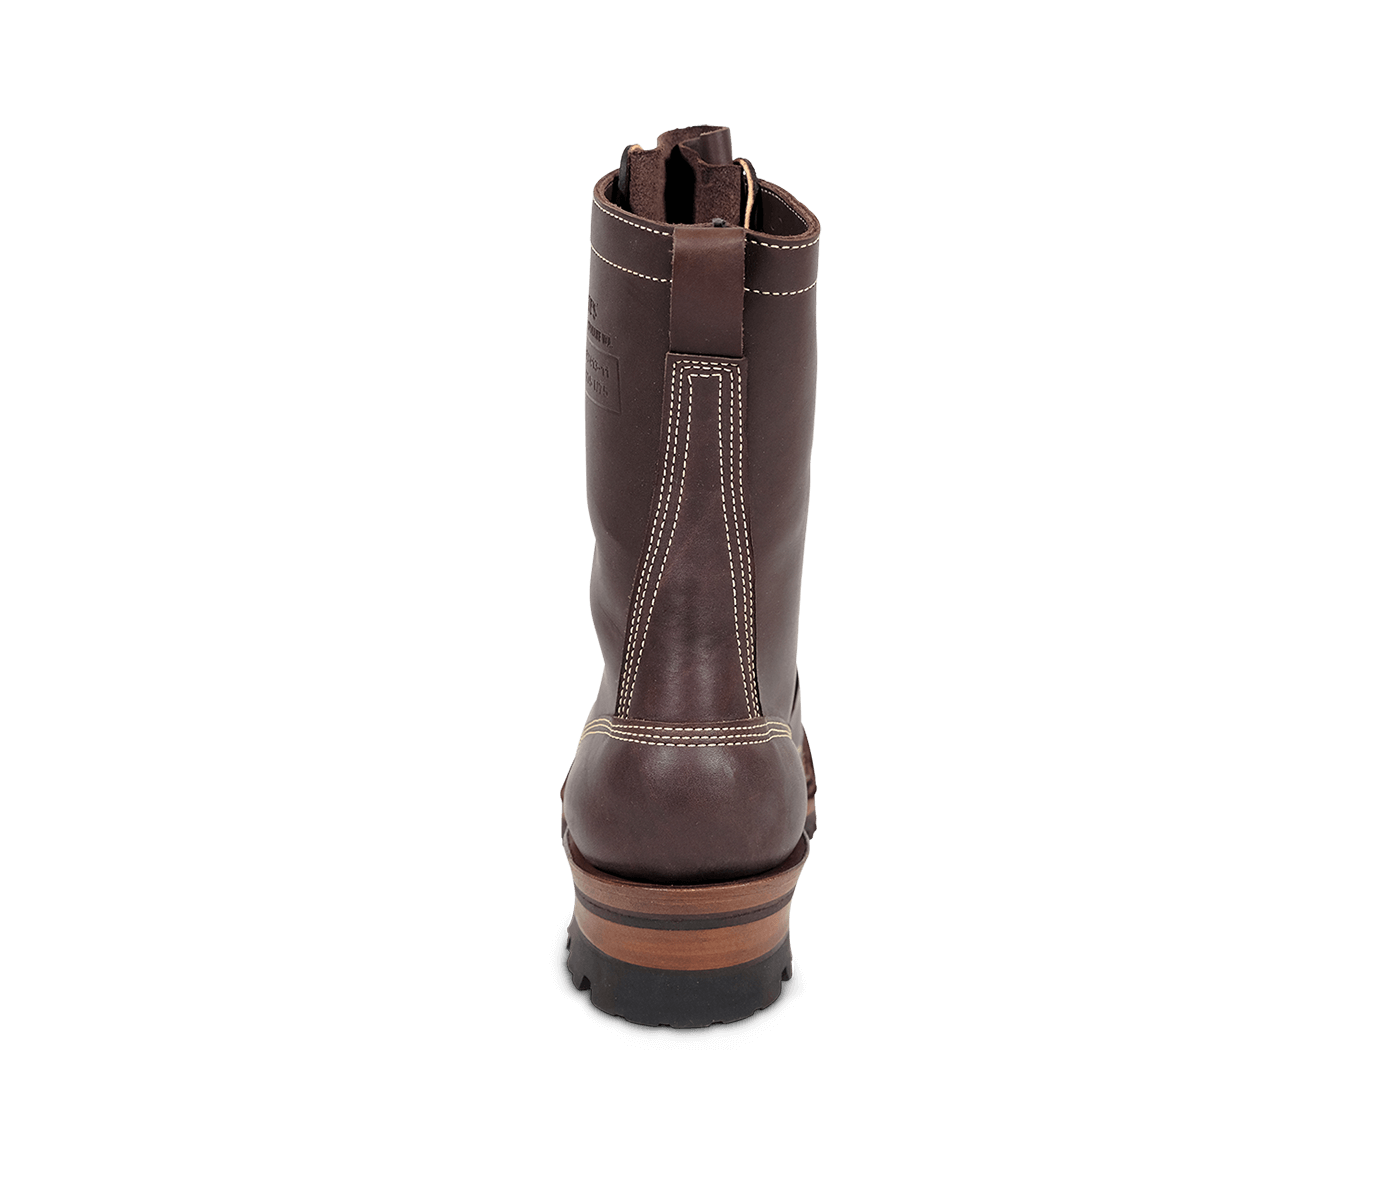 Longliner (Safety Toe): White's Boots, Inc.